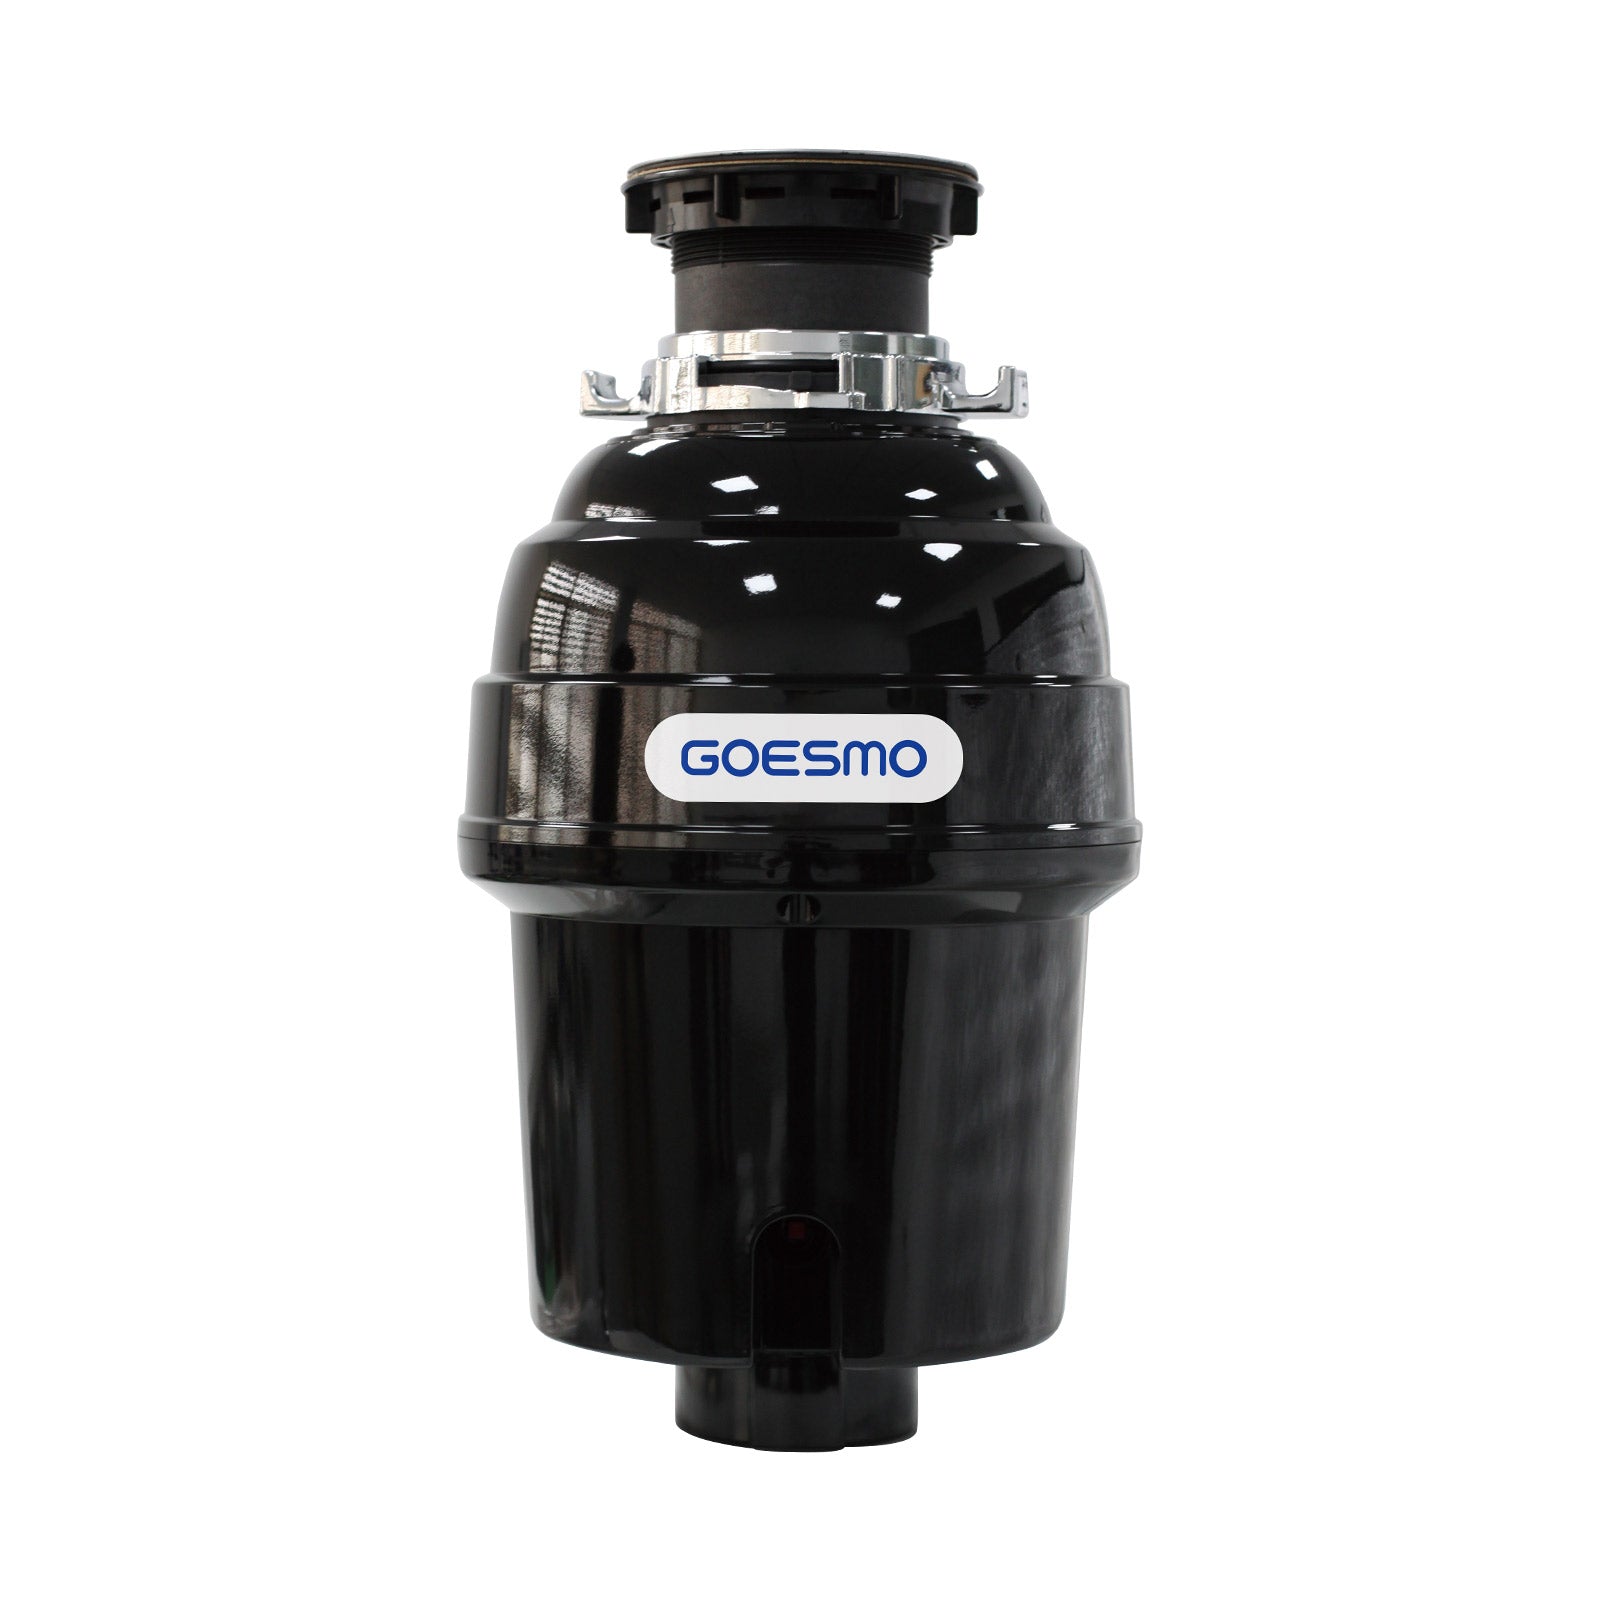 GOESMO BH91 Deluxe Garbage Disposal 3/4HP Compact Continuous Feed for Kitchen Sink